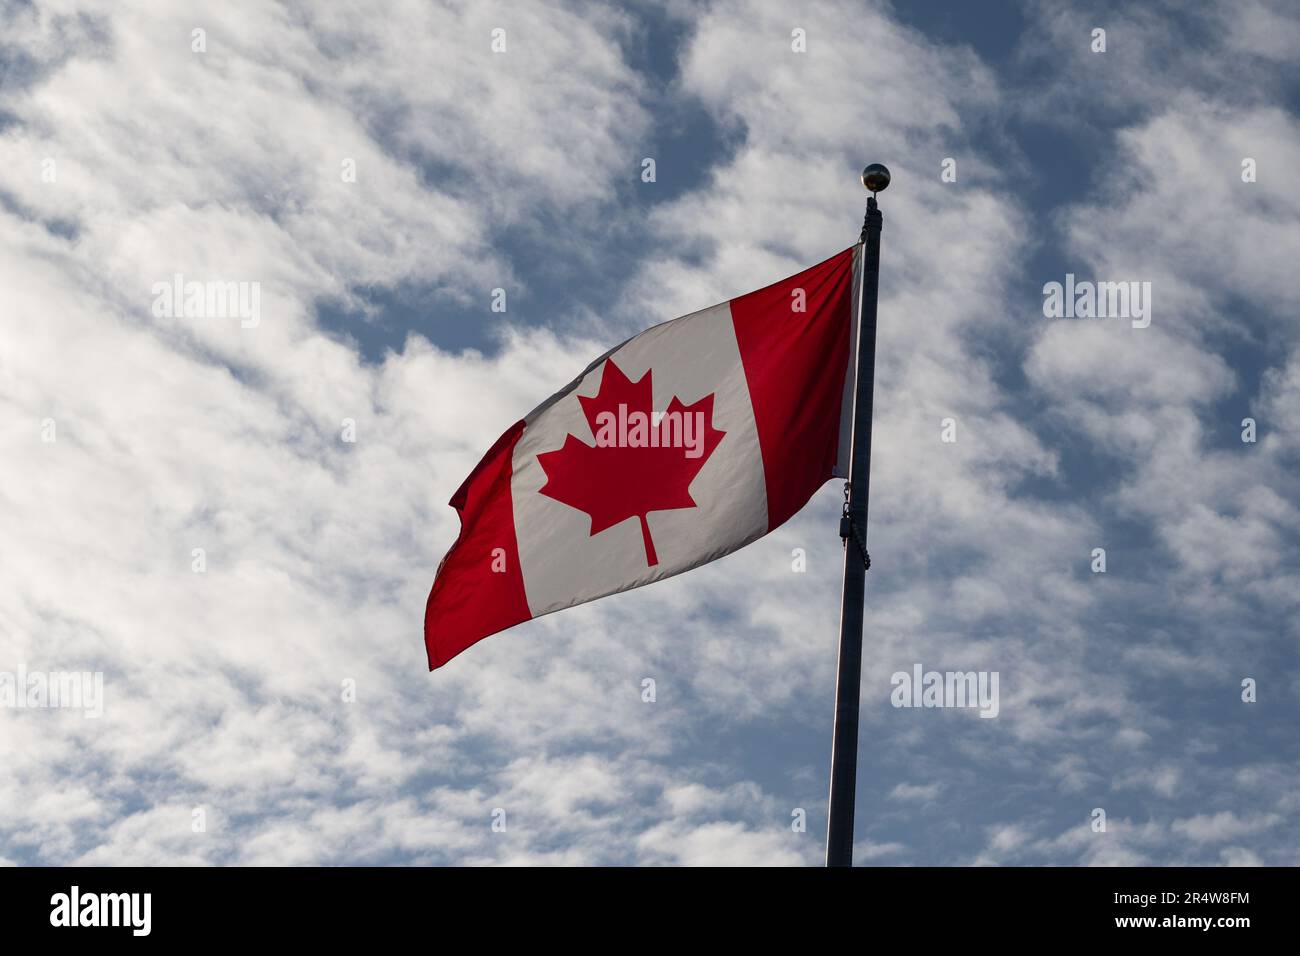 A Canadian flag blowing in the wind. The red maple leaf is on a square cloth hanging on a flag pole. The national flag of Canada is high in the sky. Stock Photo